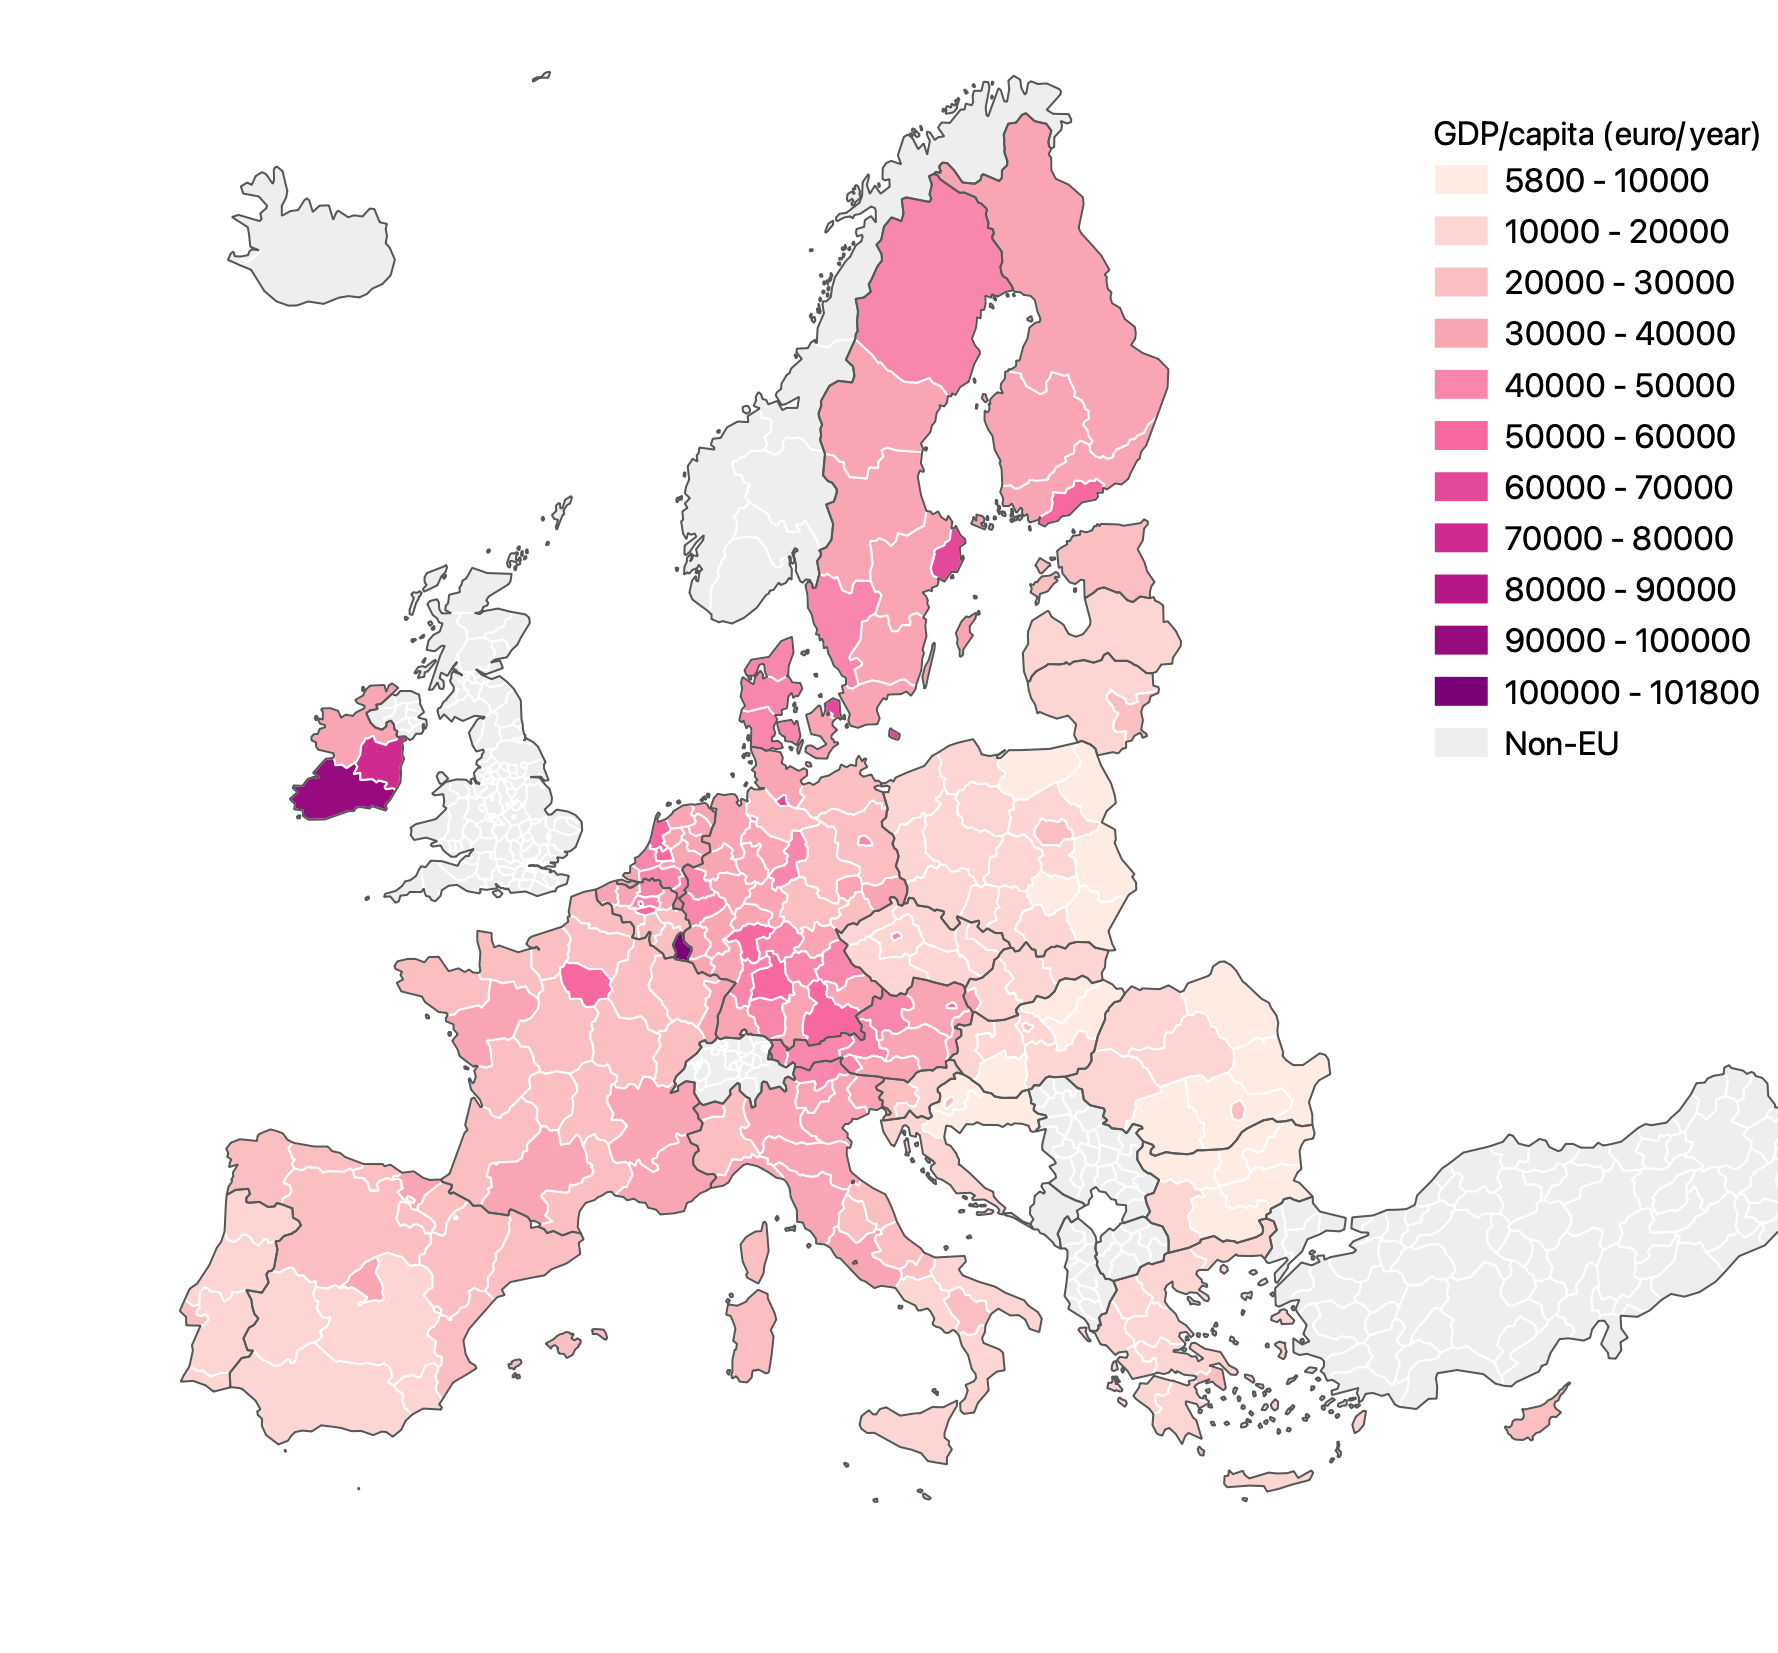 The same choropleth map as above, but with a pretty breaks classification. Each class is 10.000 €/year wide